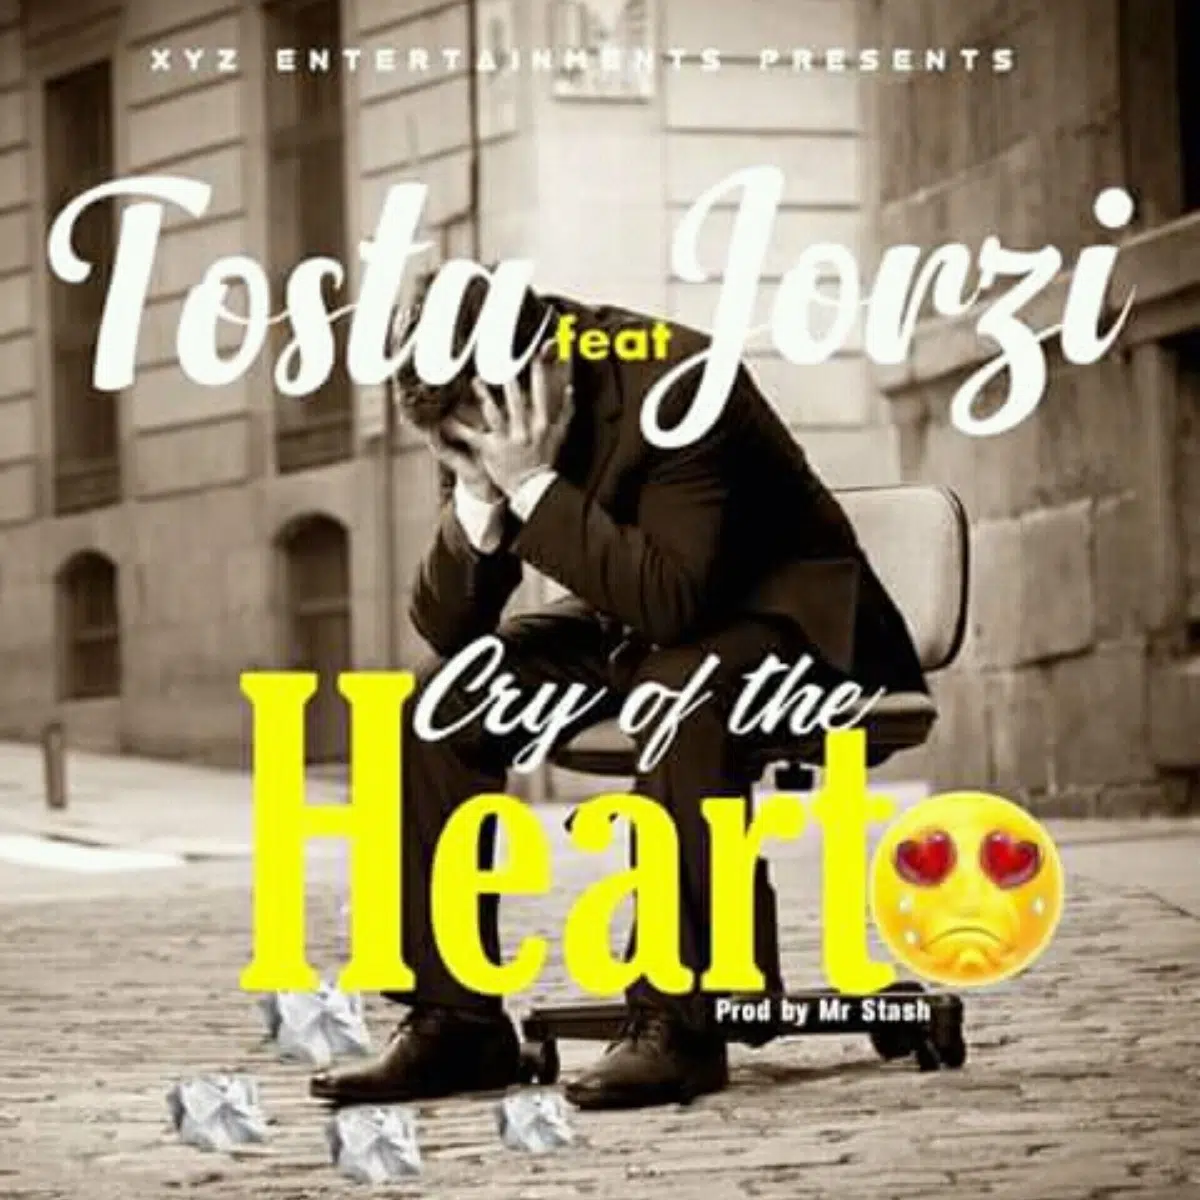 DOWNLOAD: Tosta Ft Jorzi – “Cry Of The Heart” Mp3